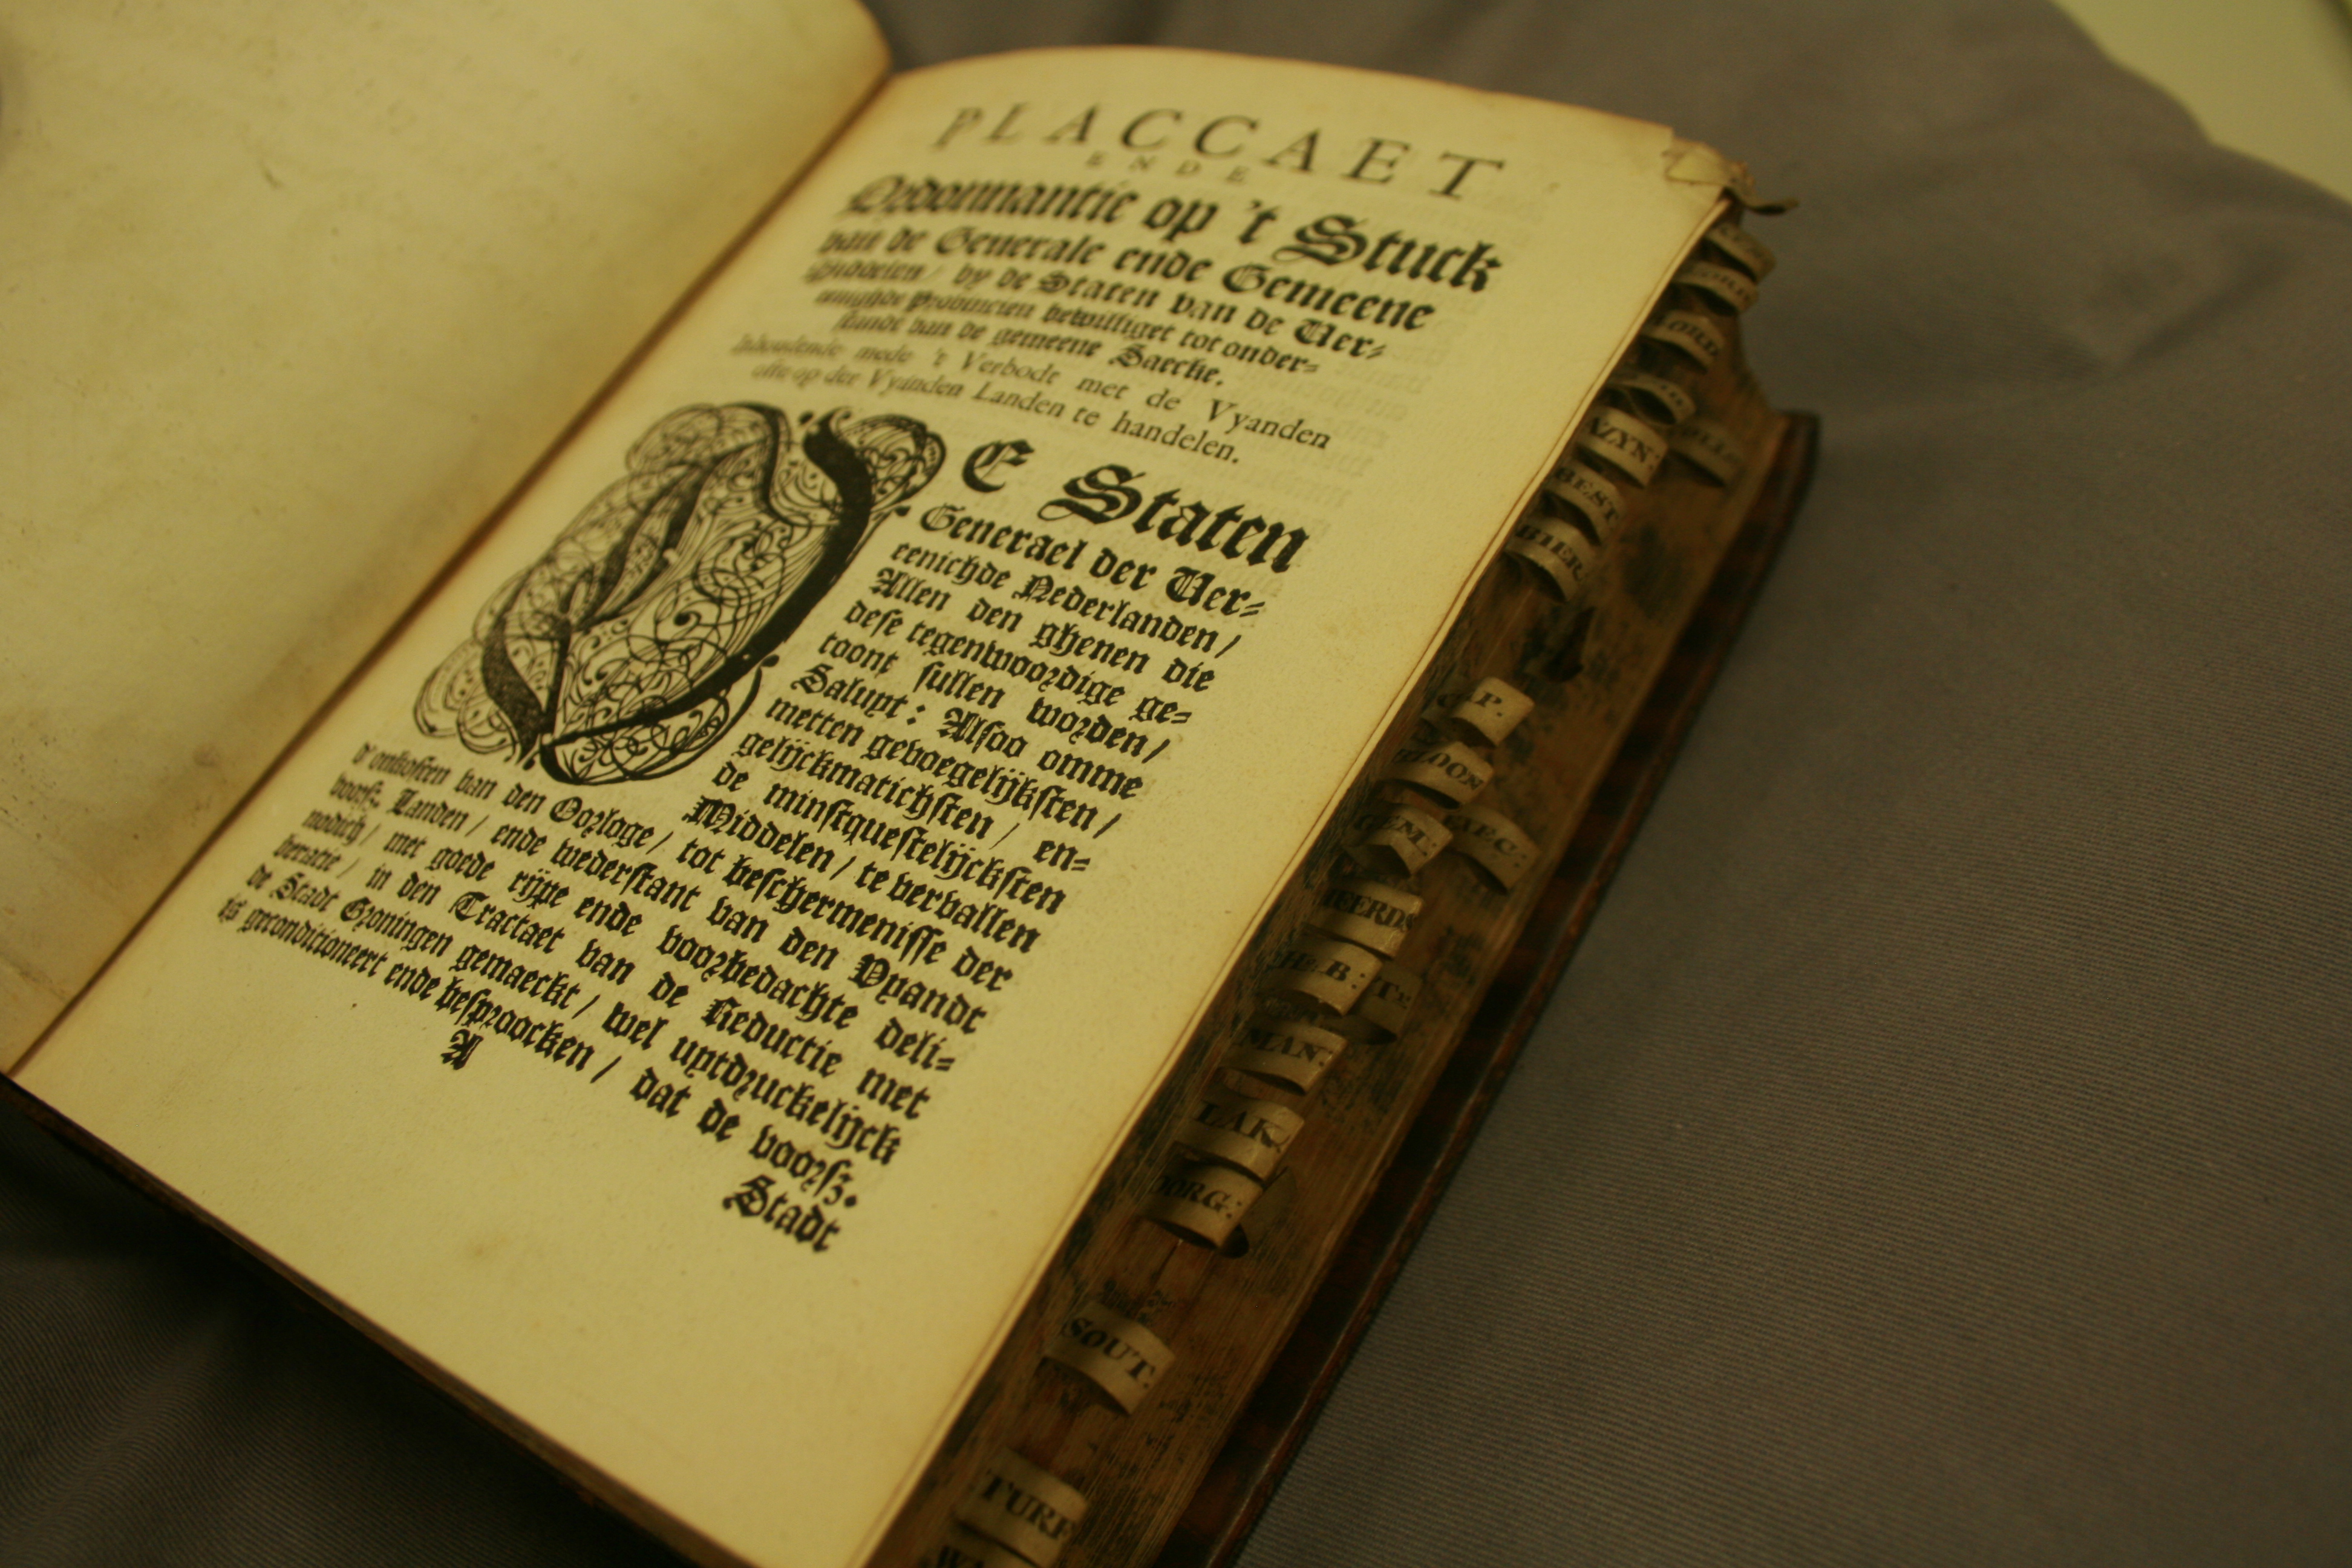 A Gothic printed book of Ordinances (KB National Library of the Netherlands).